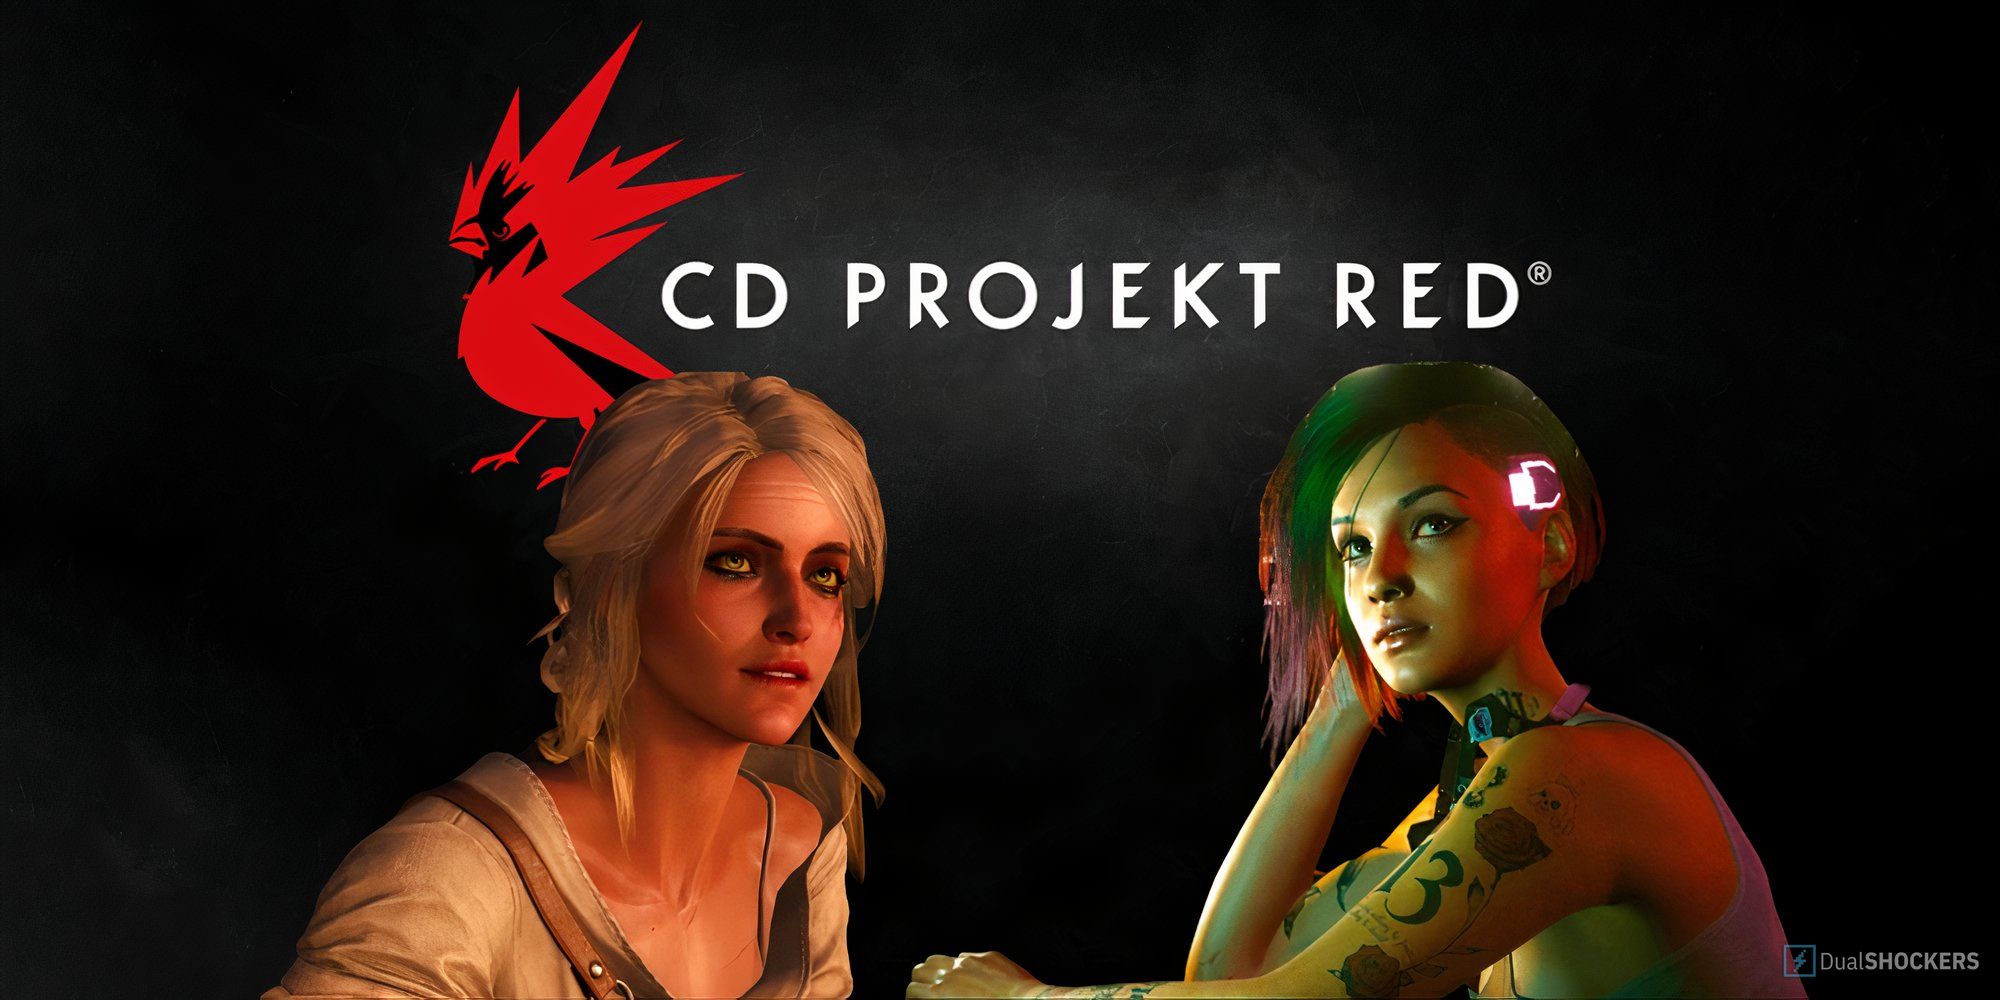 CD Projekt Red Wins Award for Employee Menstrual Leave But Comments Show How Diversity Has a Long Way To Go